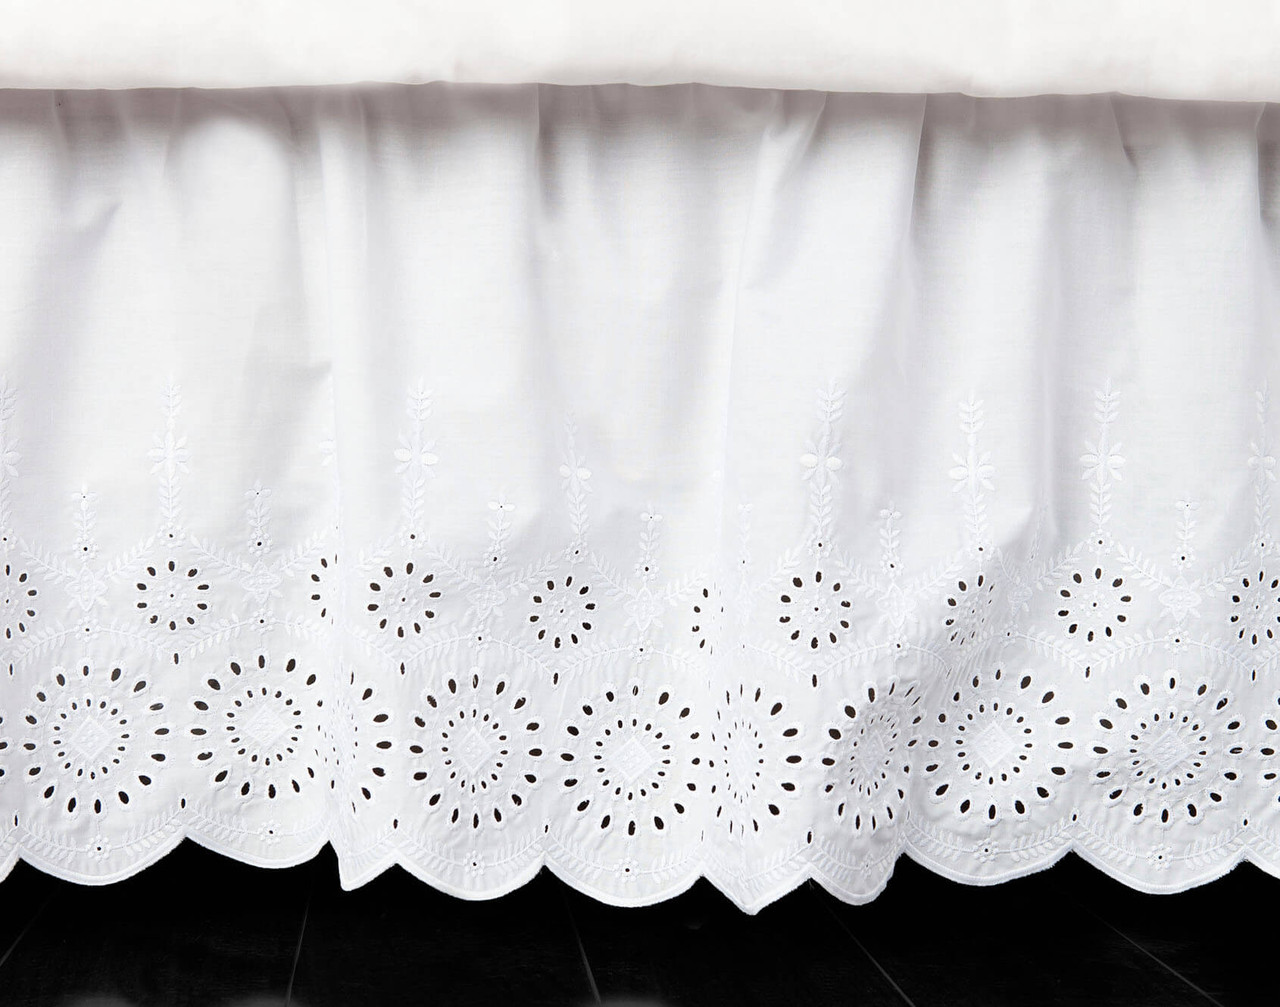 Ruffled Eyelet Bedskirt is made from 50% cotton and 50% polyester while the deck is 100% polyester. 